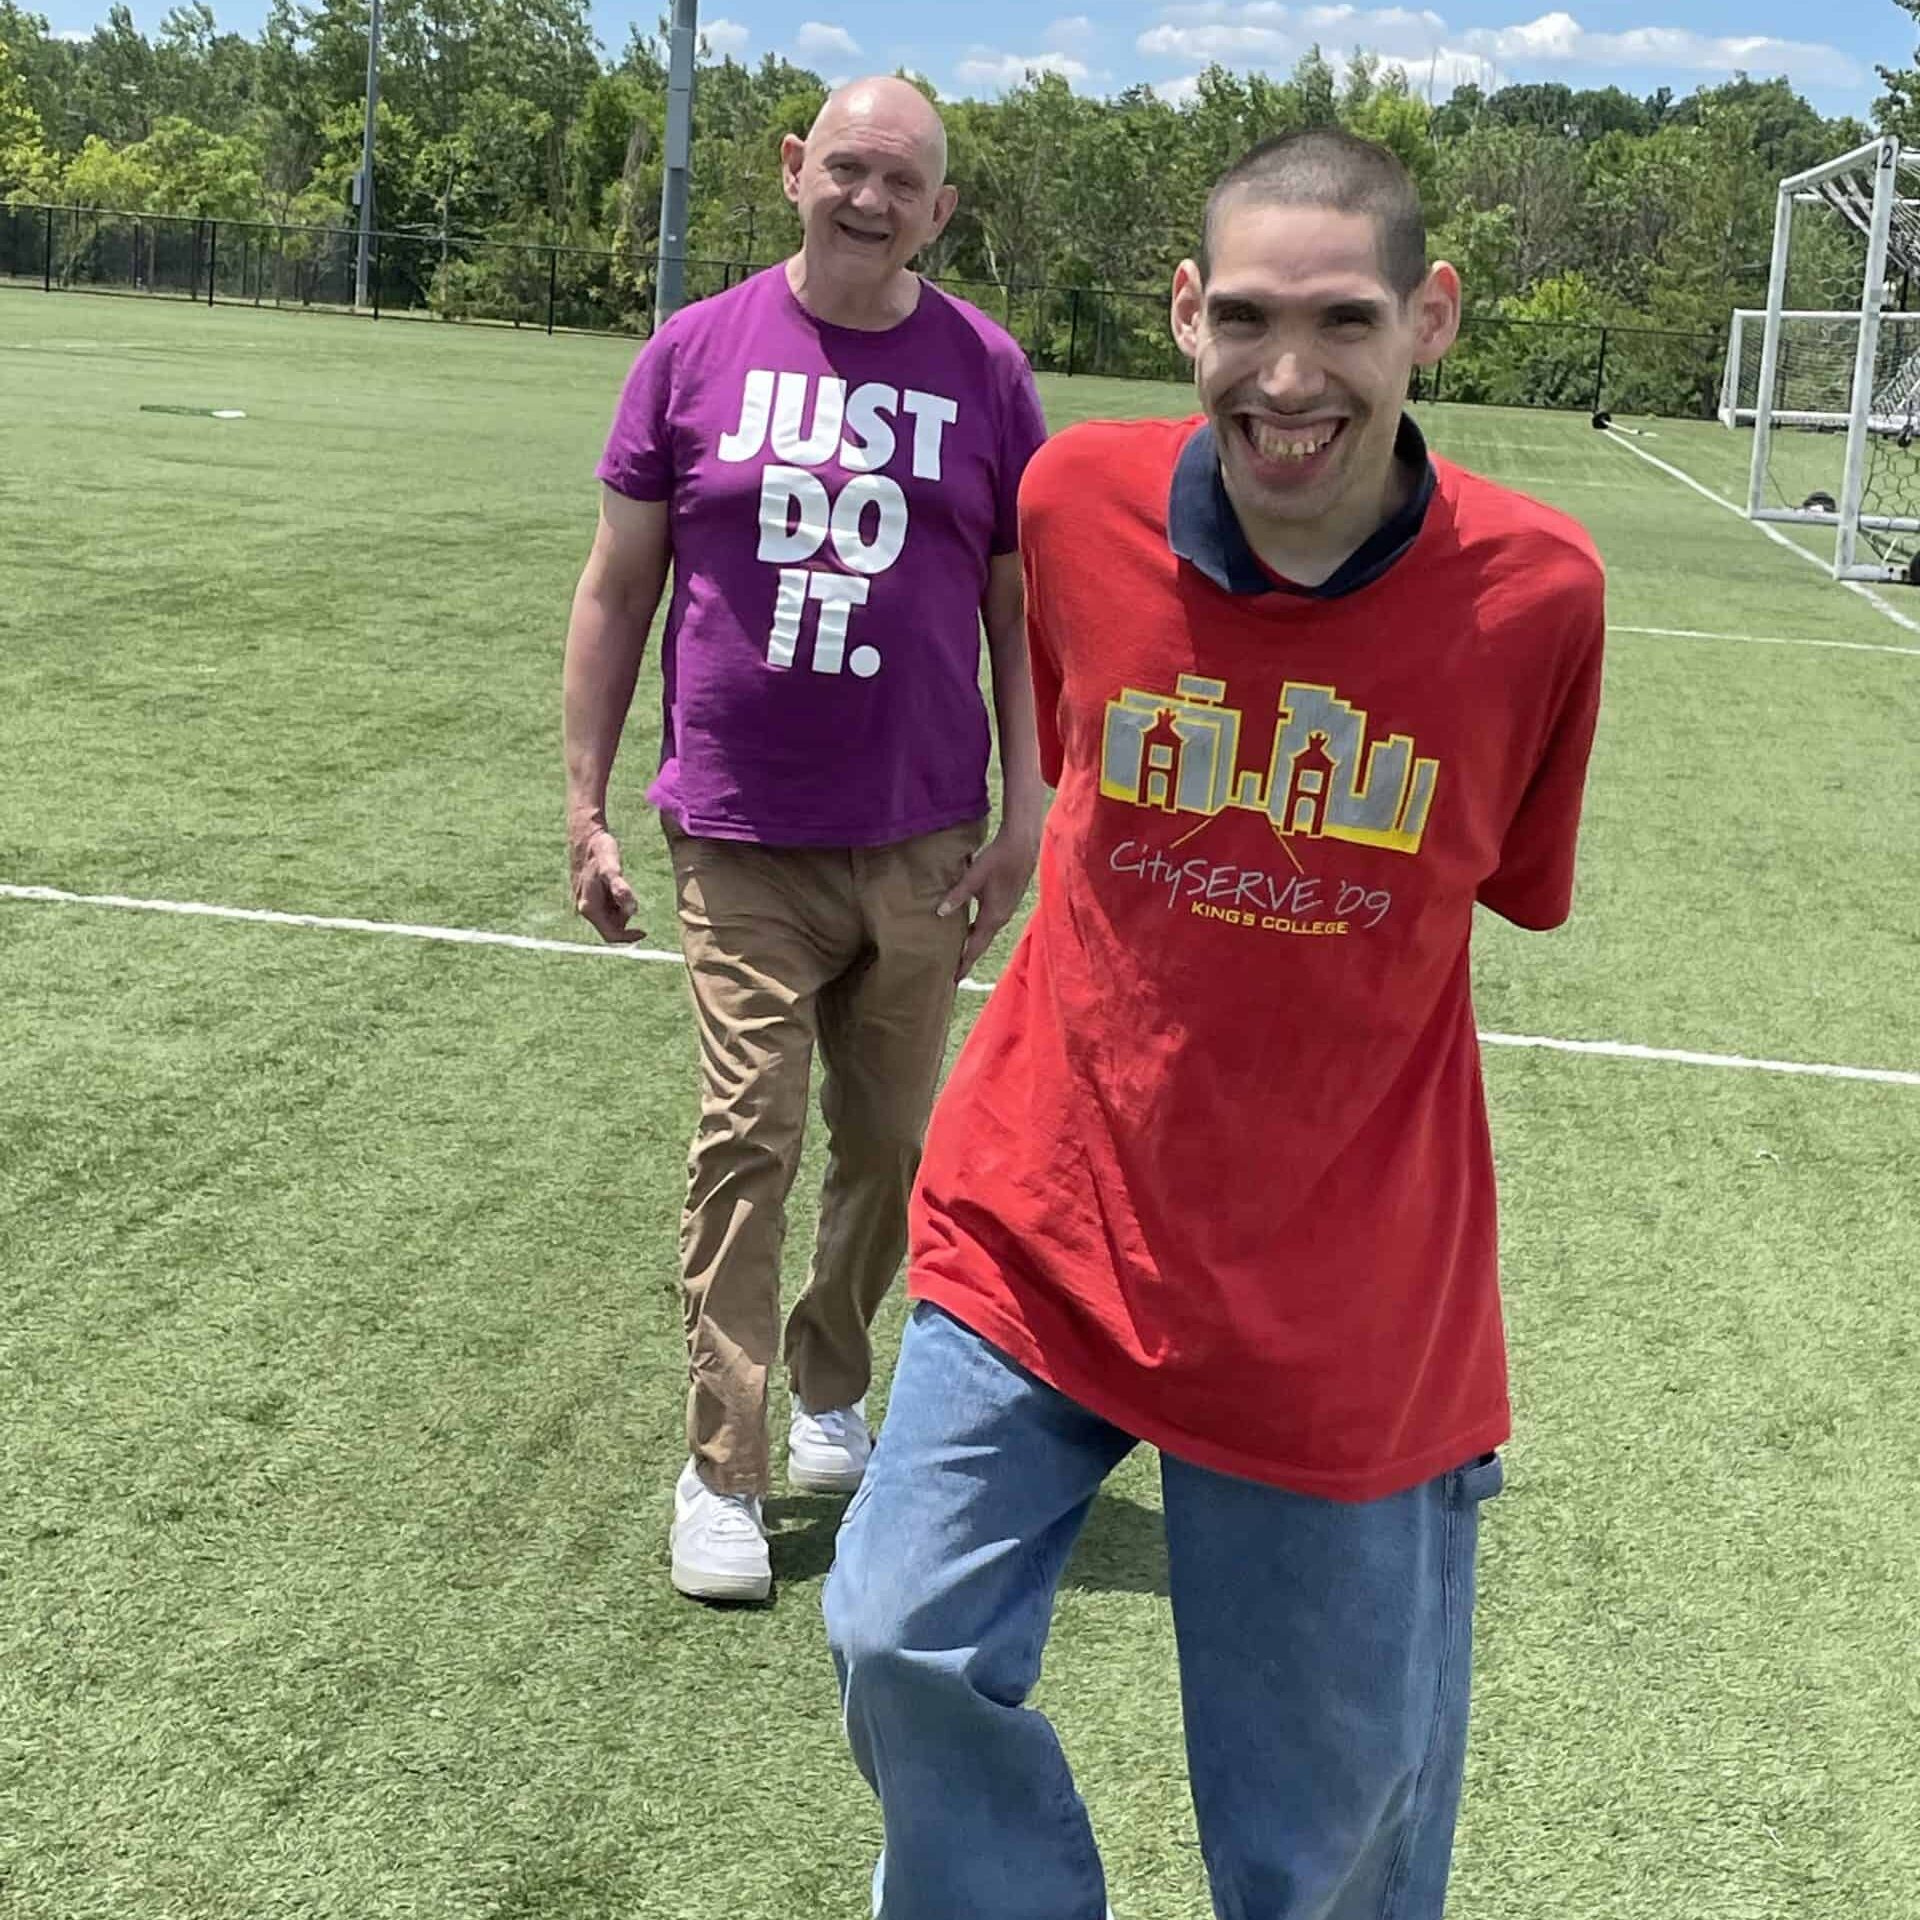 Two intellectually and developmentally disabled men enjoying a day in the park.